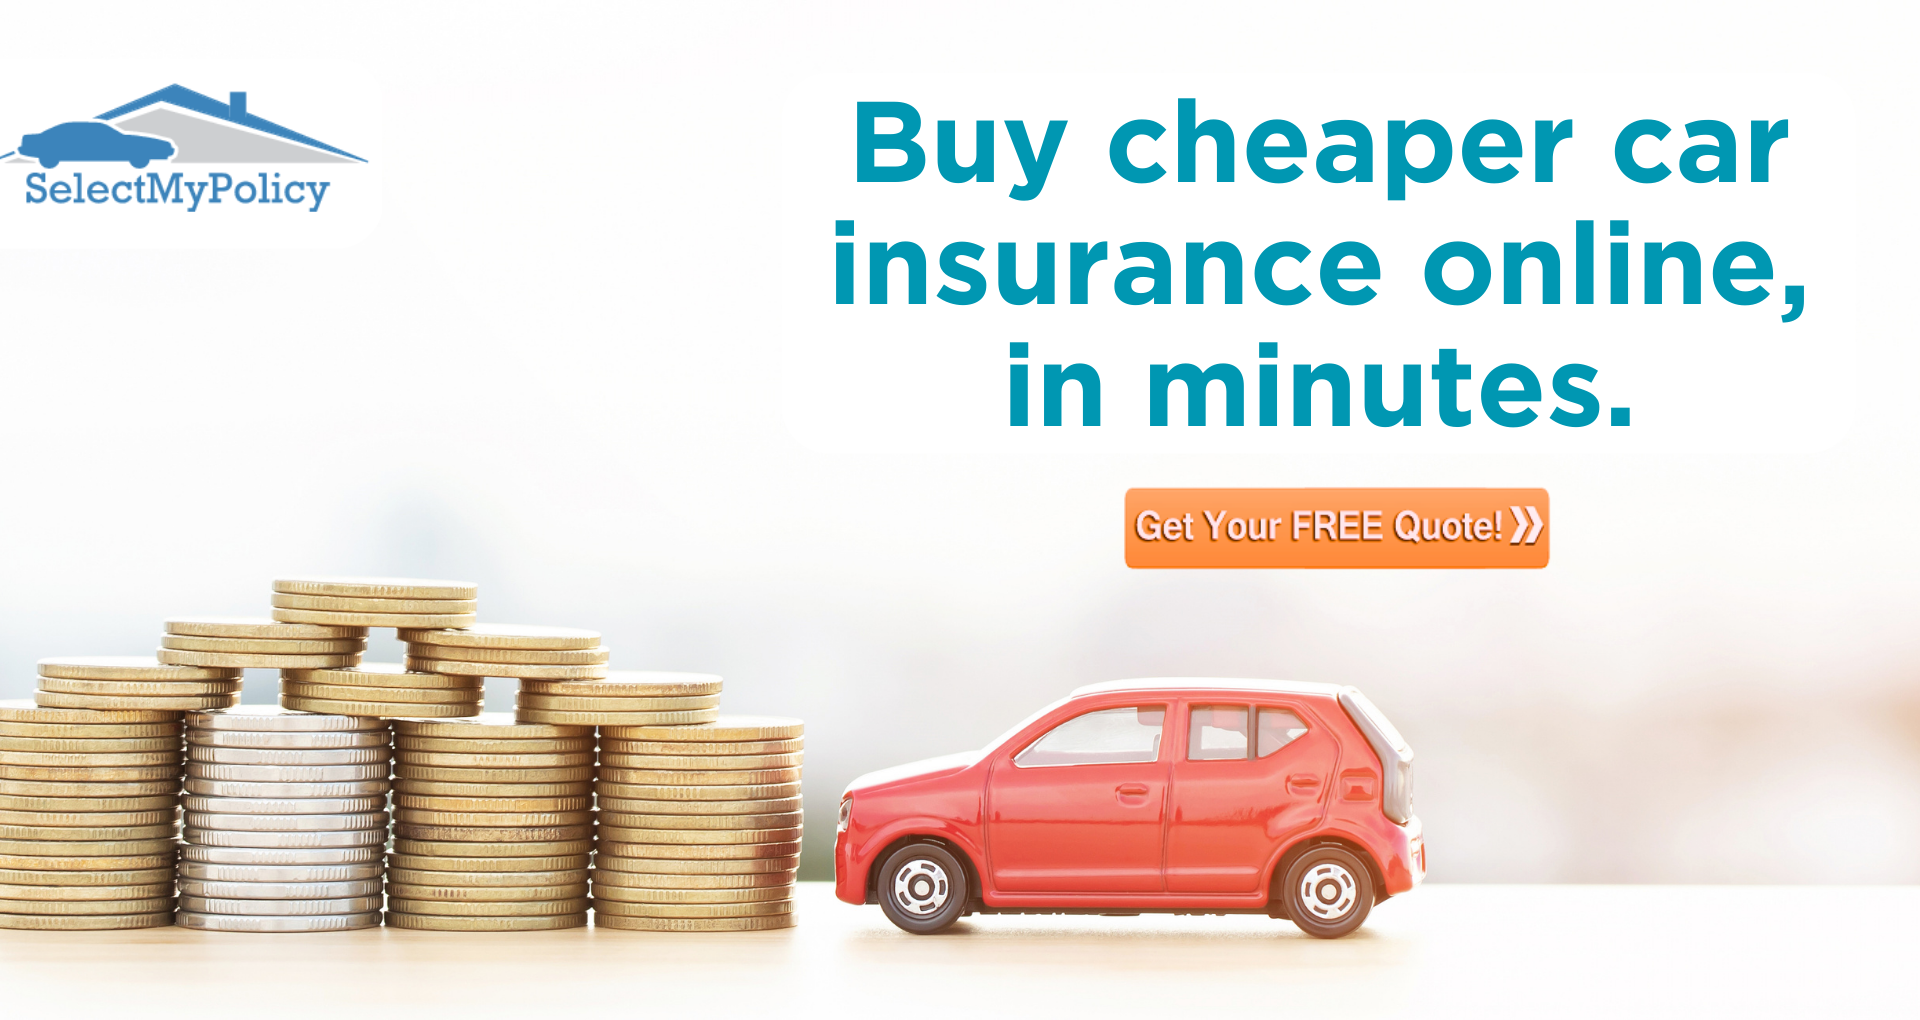 Auto insurance: Buy cheaper car insurance online, in minutes.